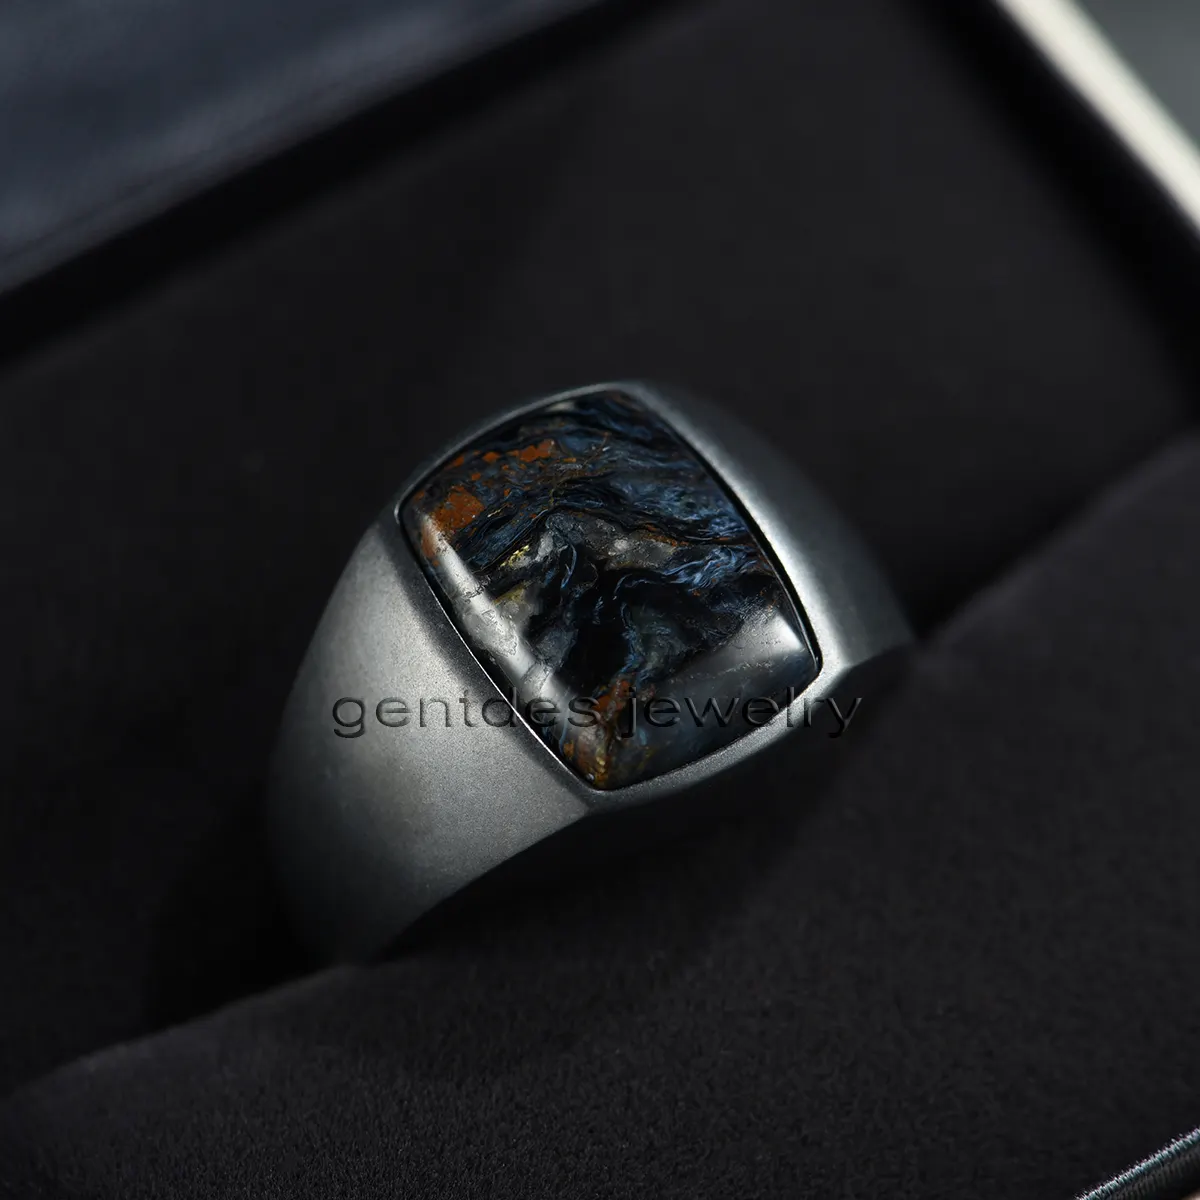 Gentdes Jewelry Men's Wedding Band Black Stainless Steel Signet Ring Pietersite Band For Men's Engagement Ring Father Gift